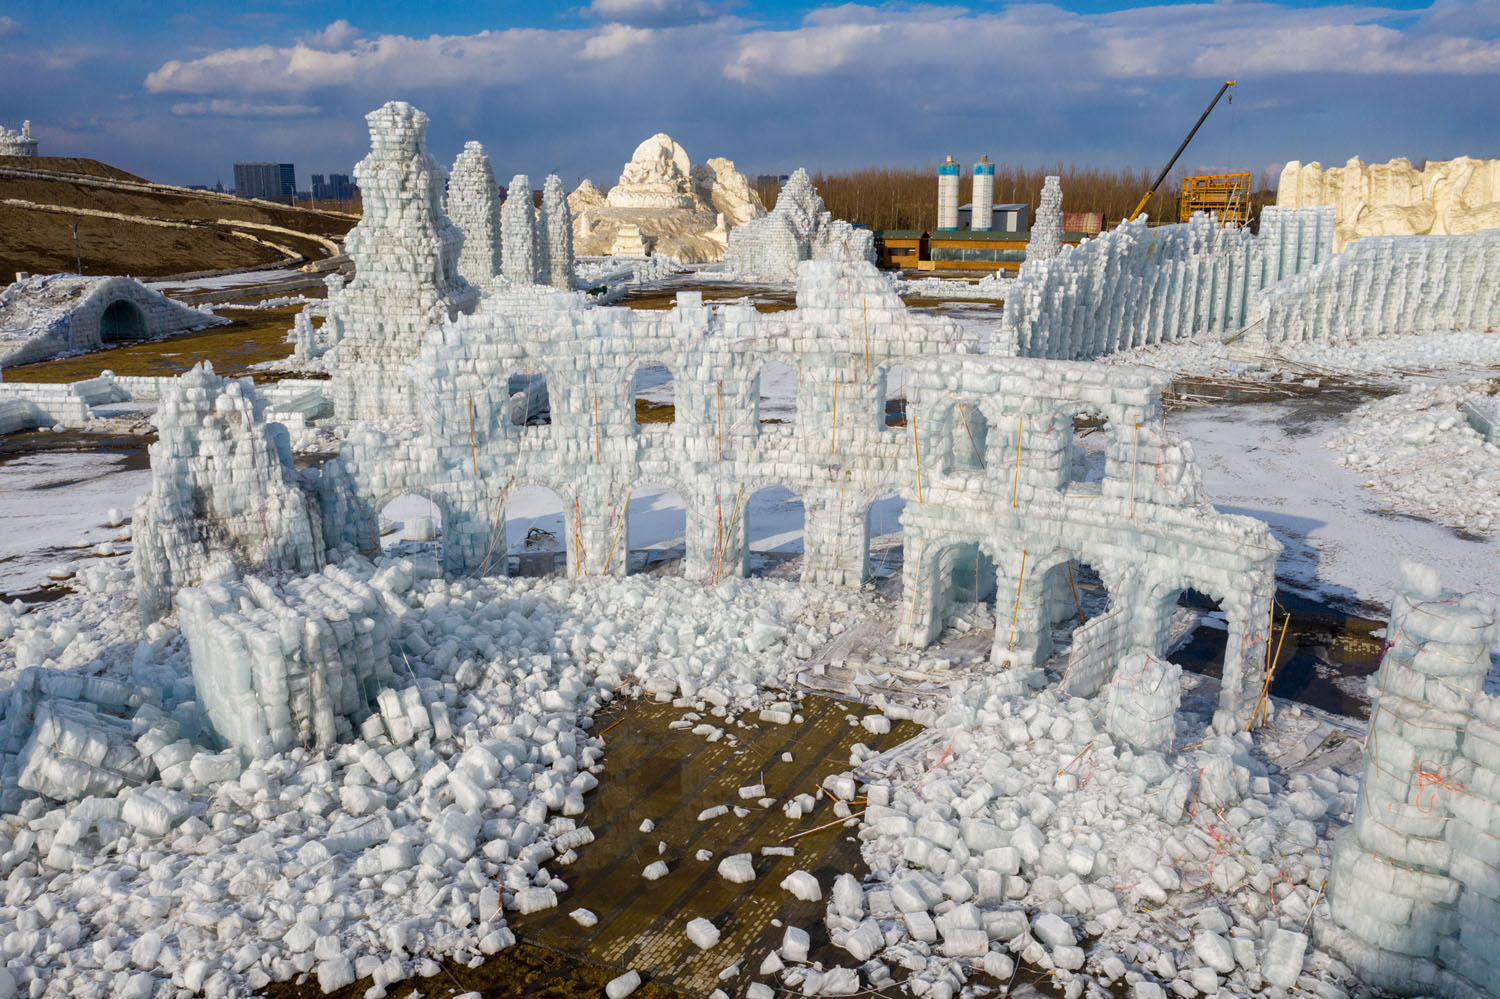 The of Harbin's Melting Ice Sculptures The